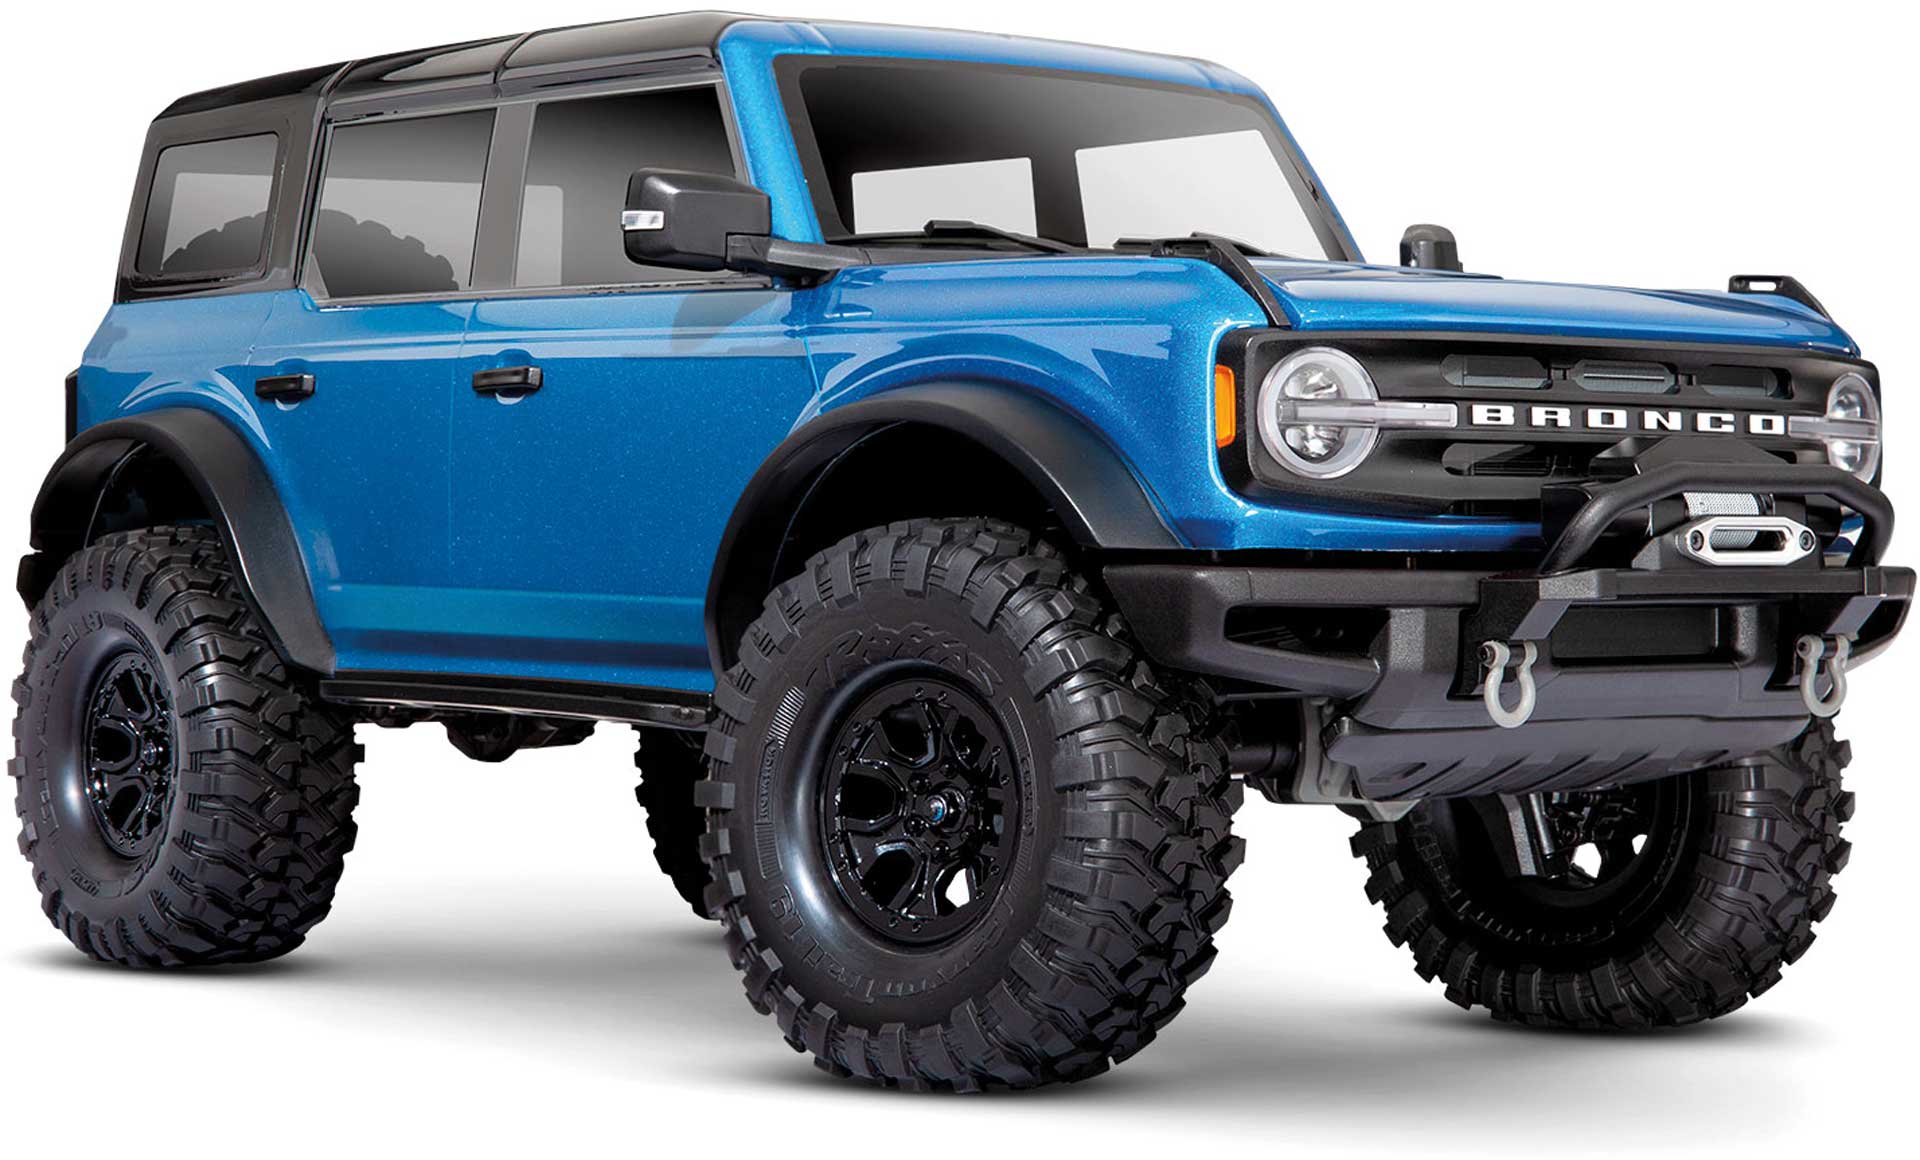 TRAXXAS TRX-4 2021 FORD BRONCO bleu RTR Sans Accu /Chargeur 1/10 4WD SCALE-CRAWLER BRUSHED